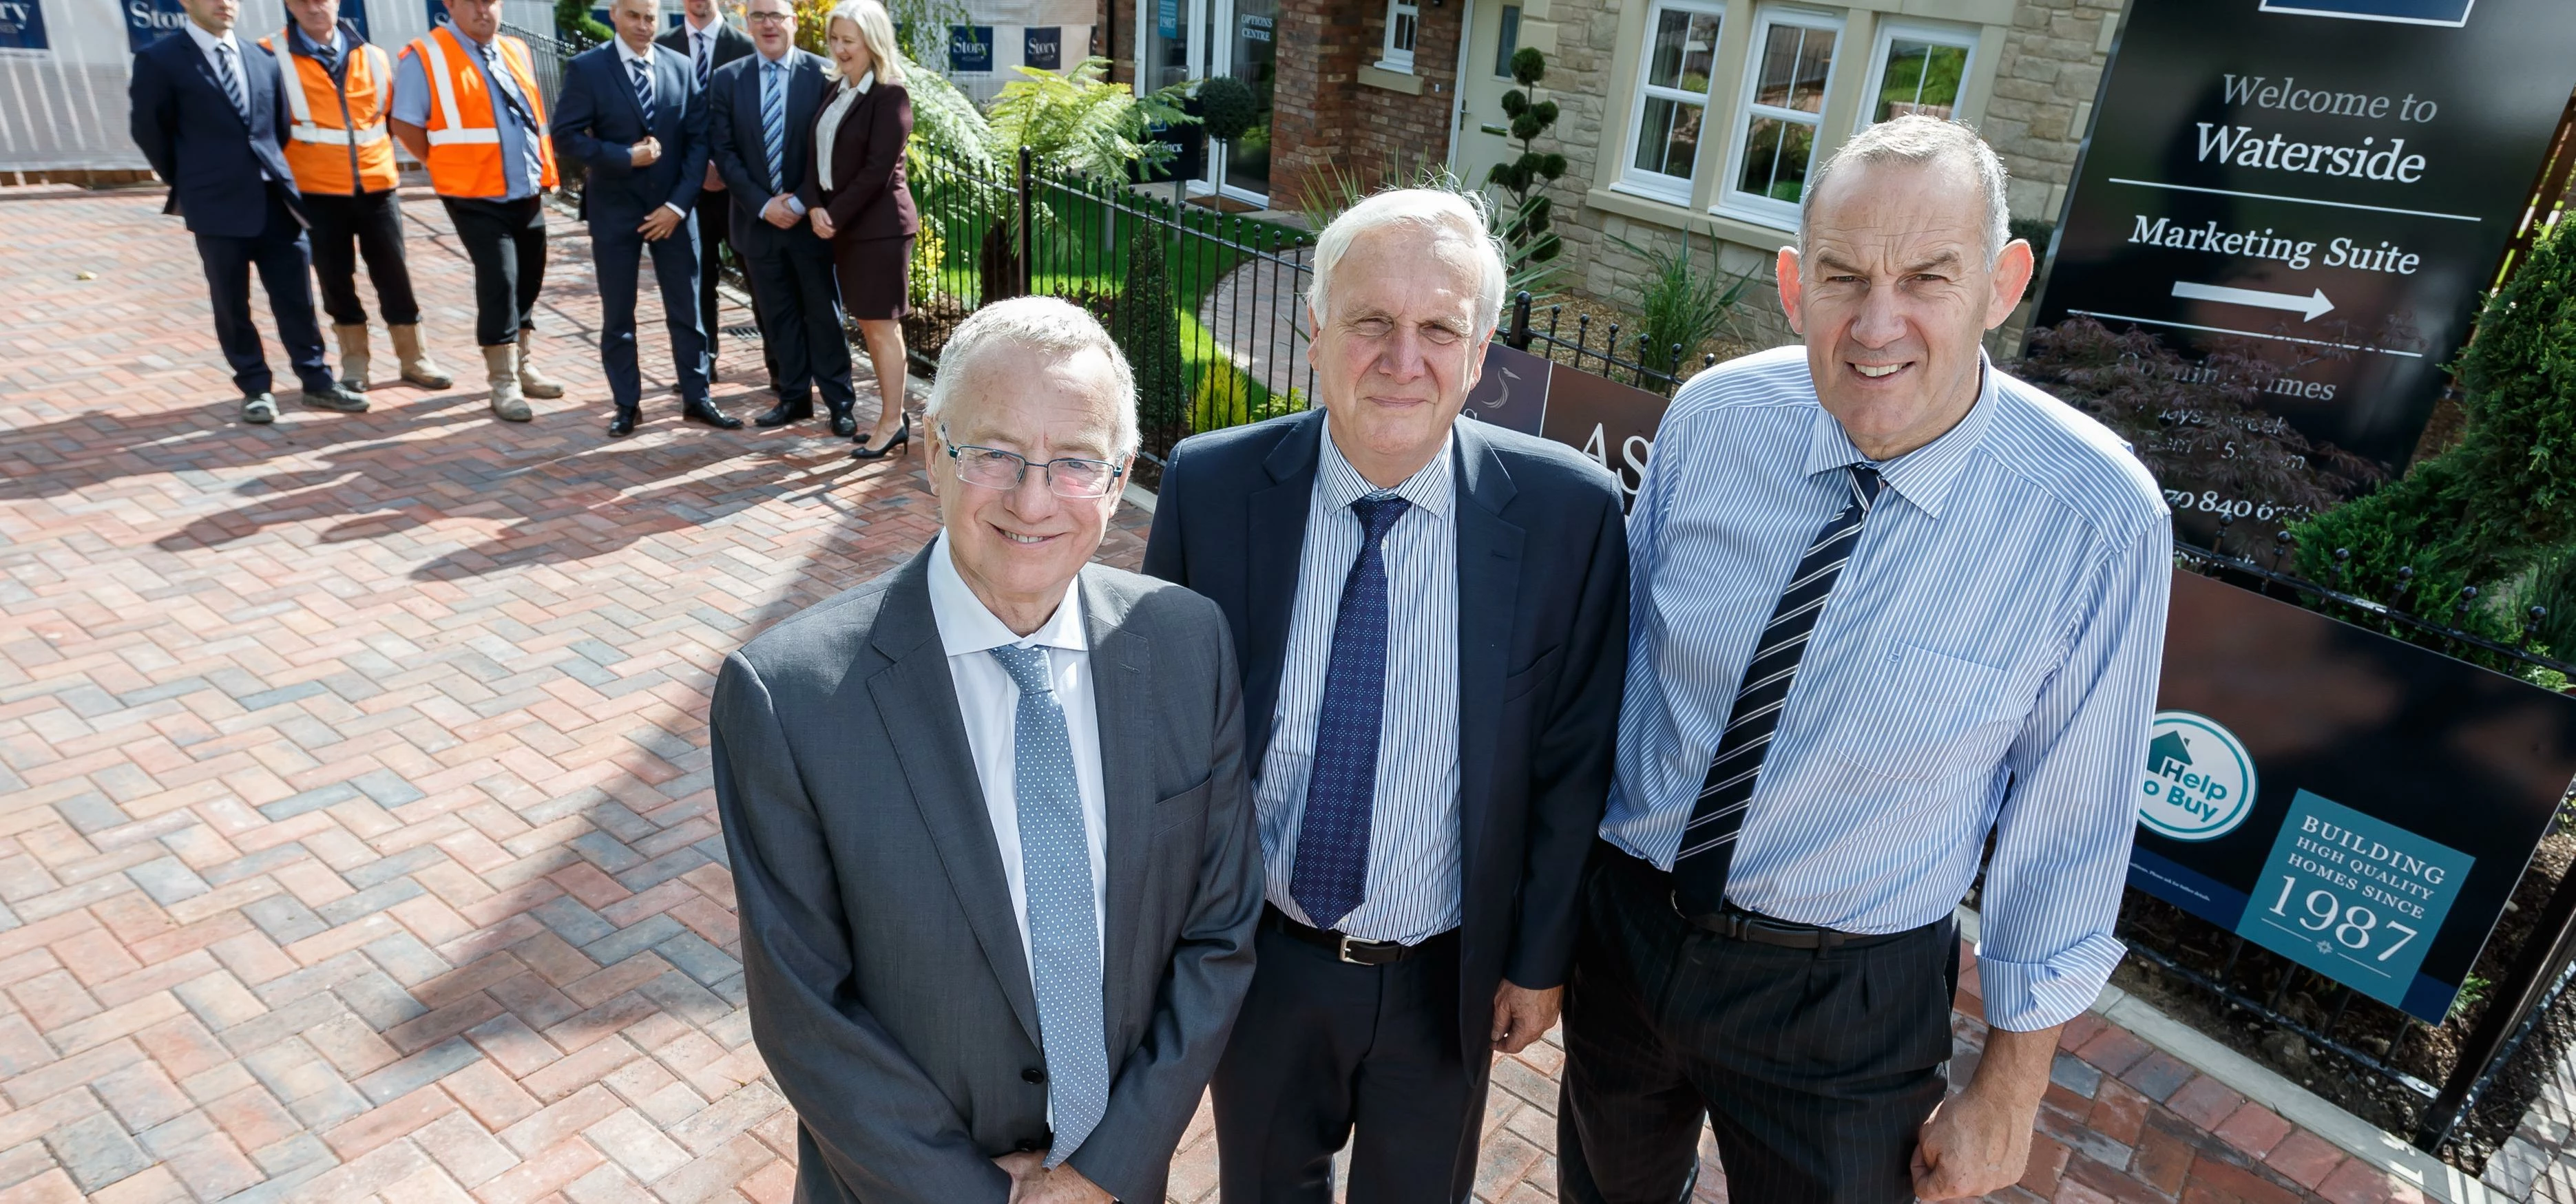 Councillor Peter Rankin with Sir Edward Lister and Fred Story at the Waterside development.